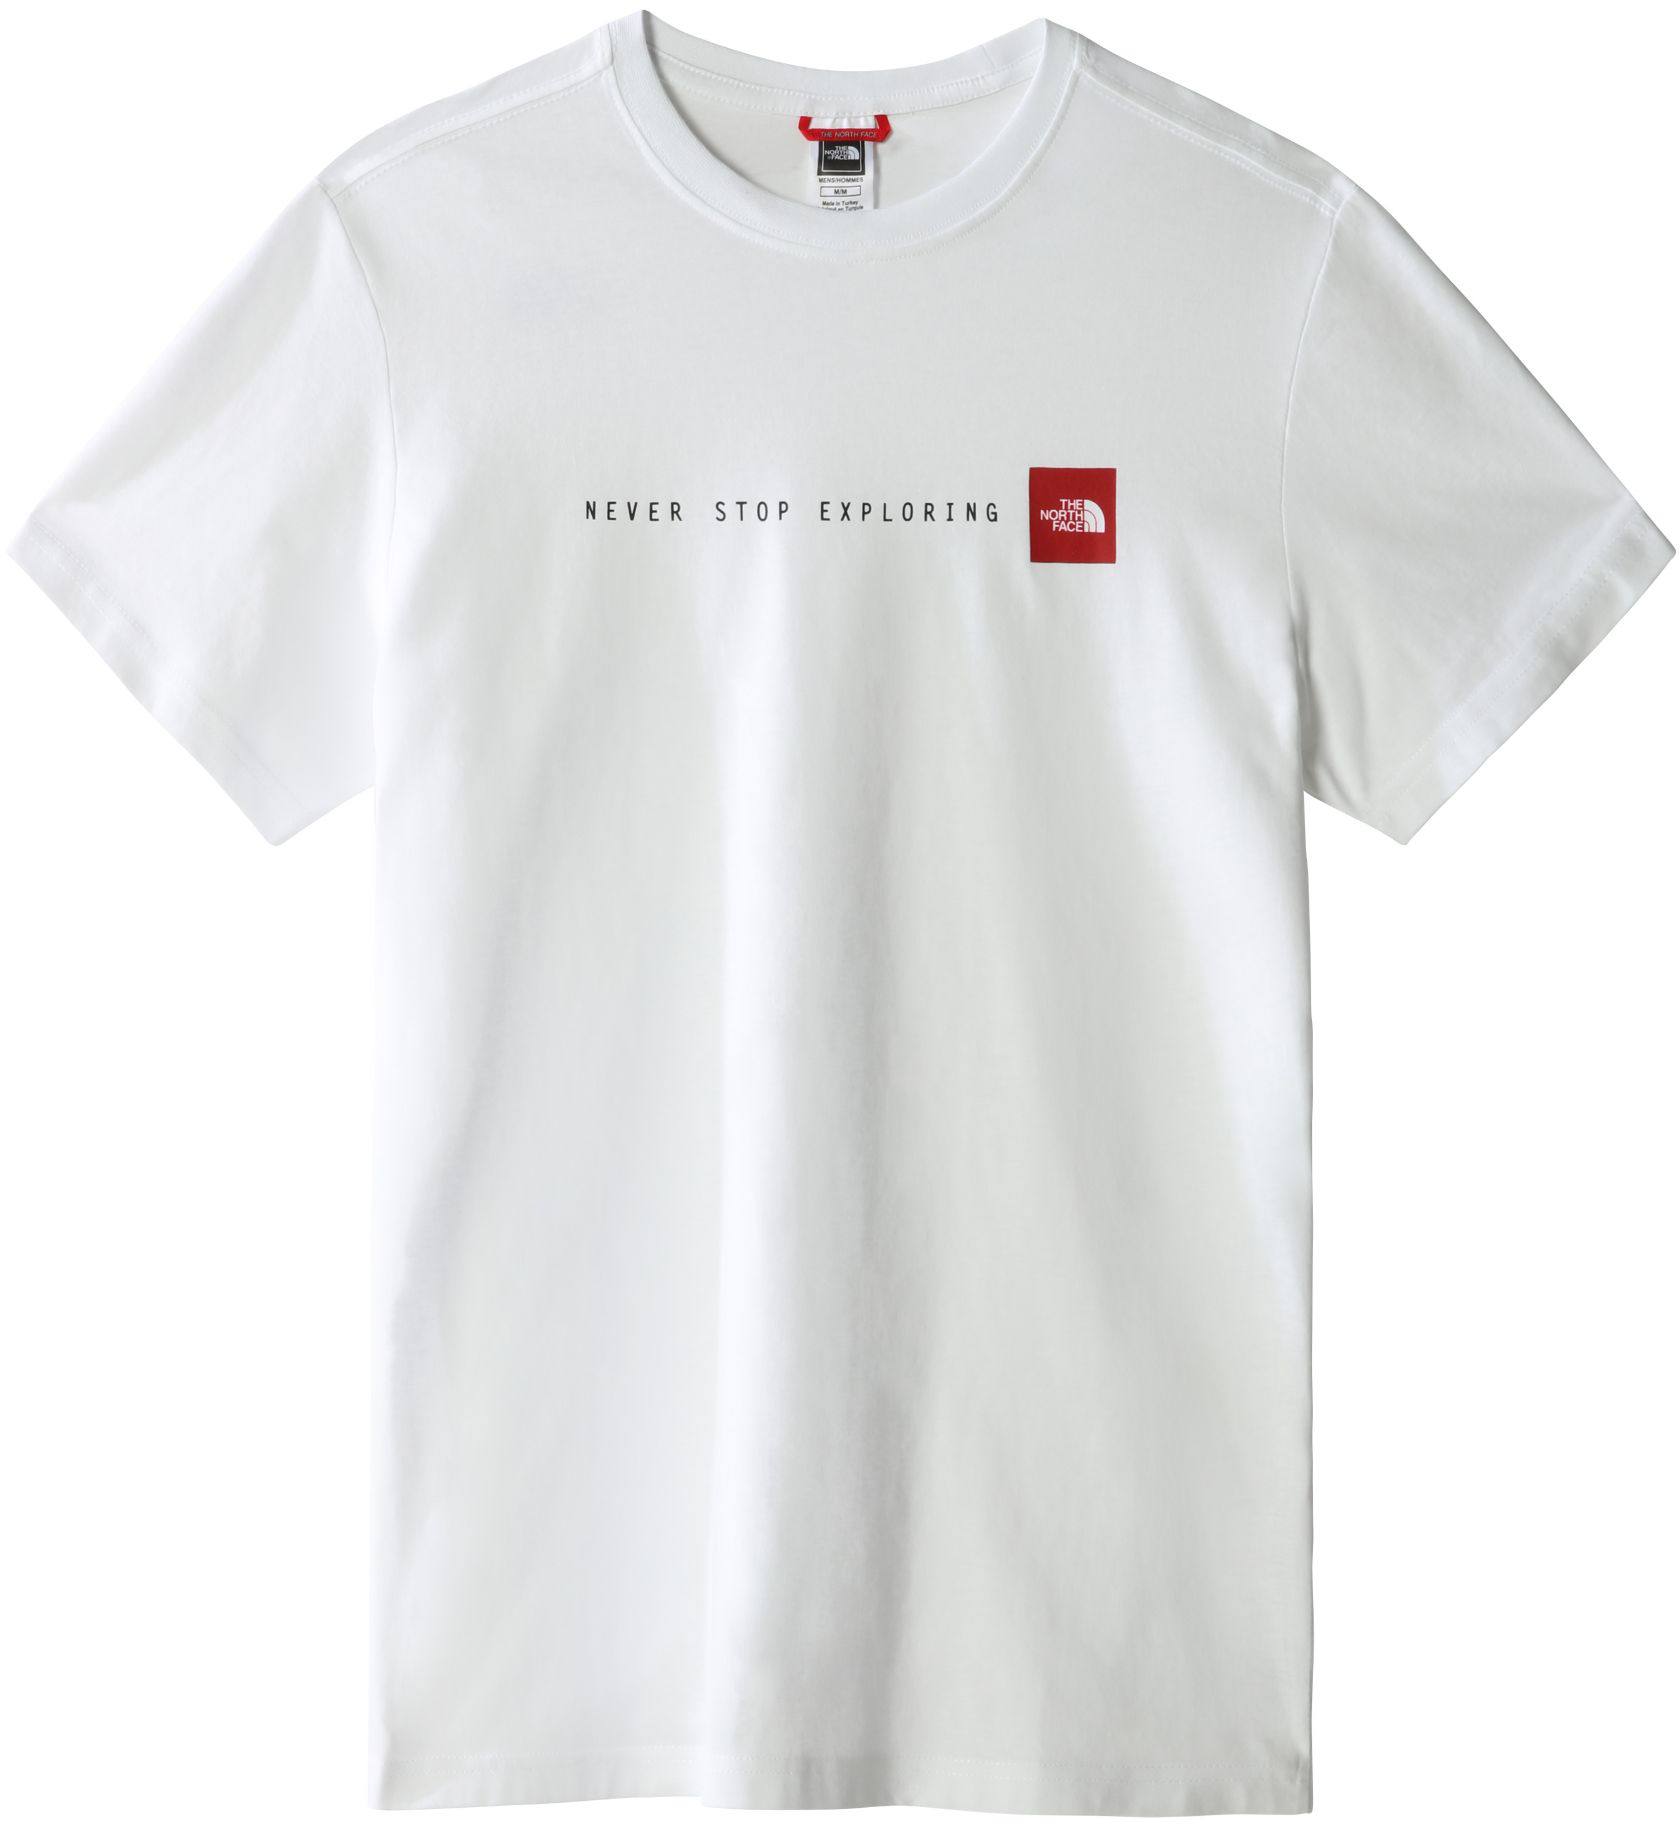 Never Stop Exploring Tee White S